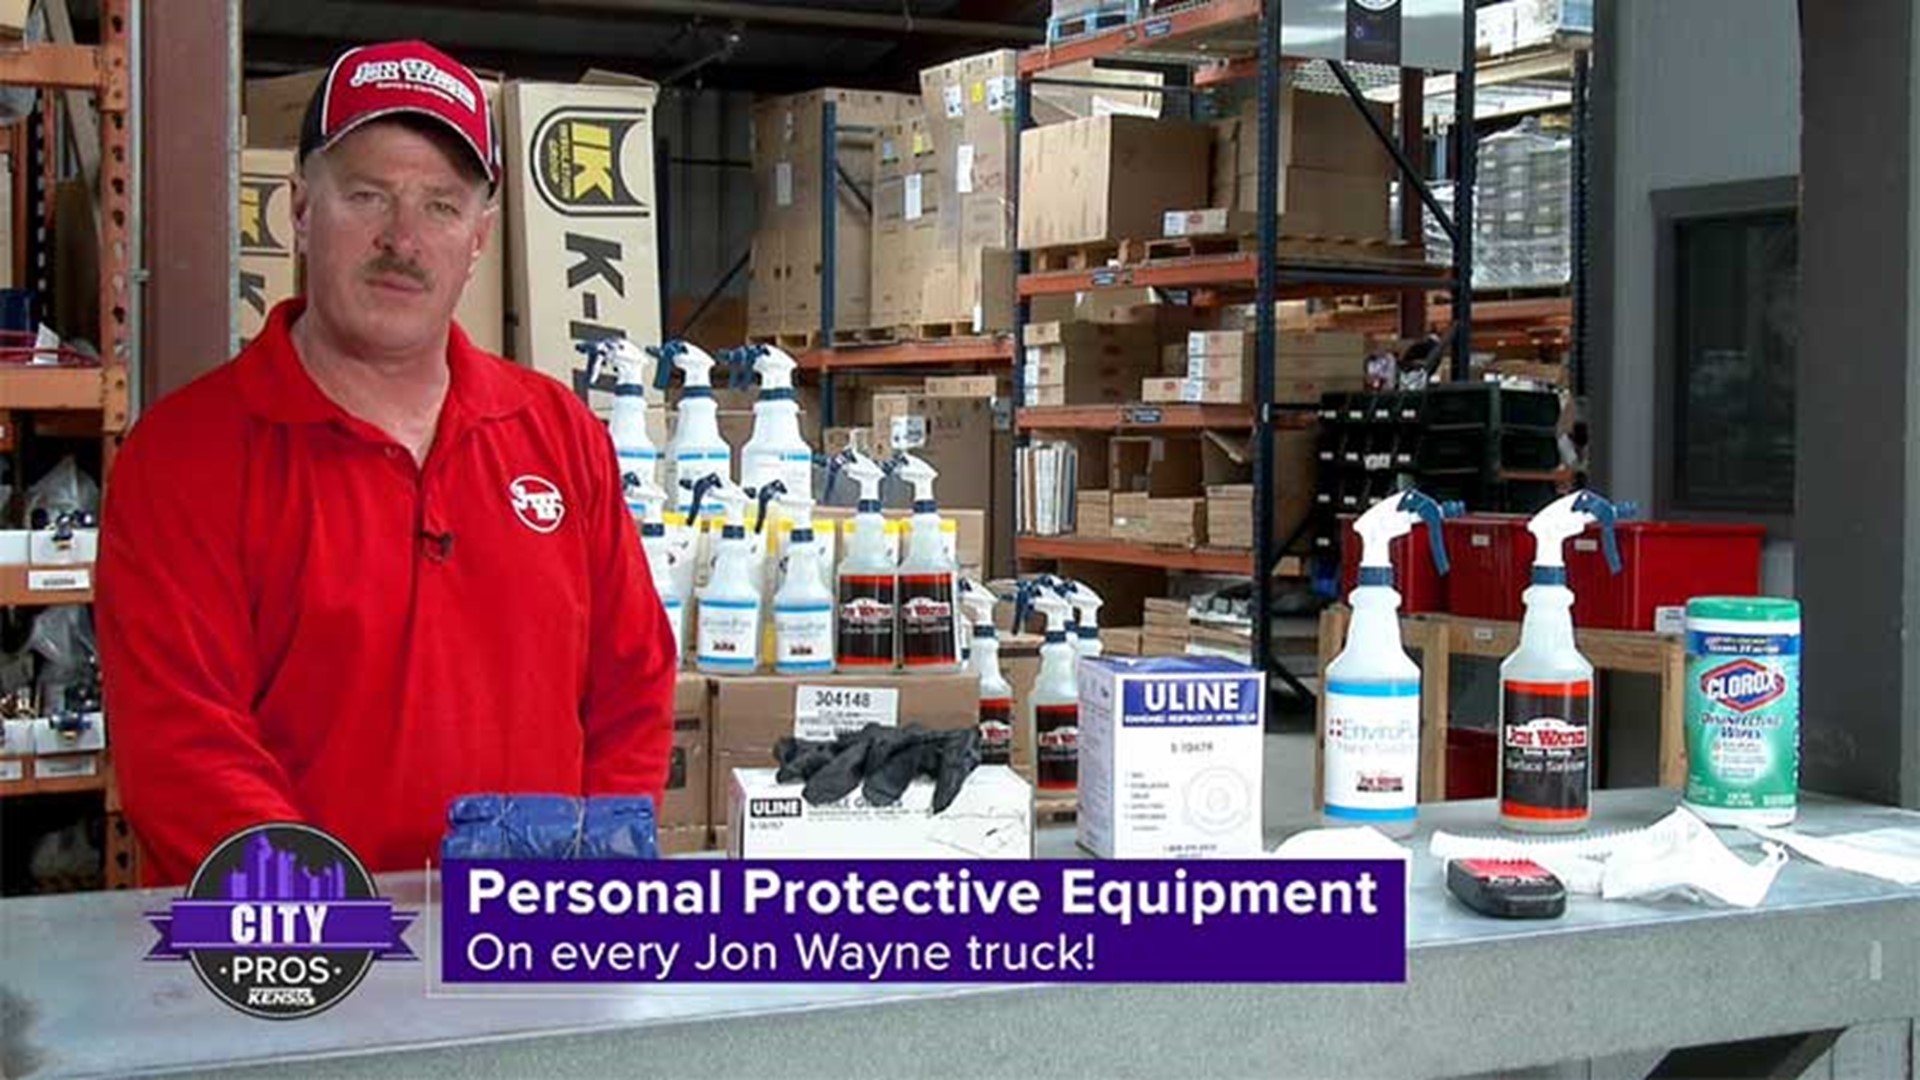 Jon Wayne team members wear shoe covers and black nitrile gloves to avoid bringing contaminants into your home.